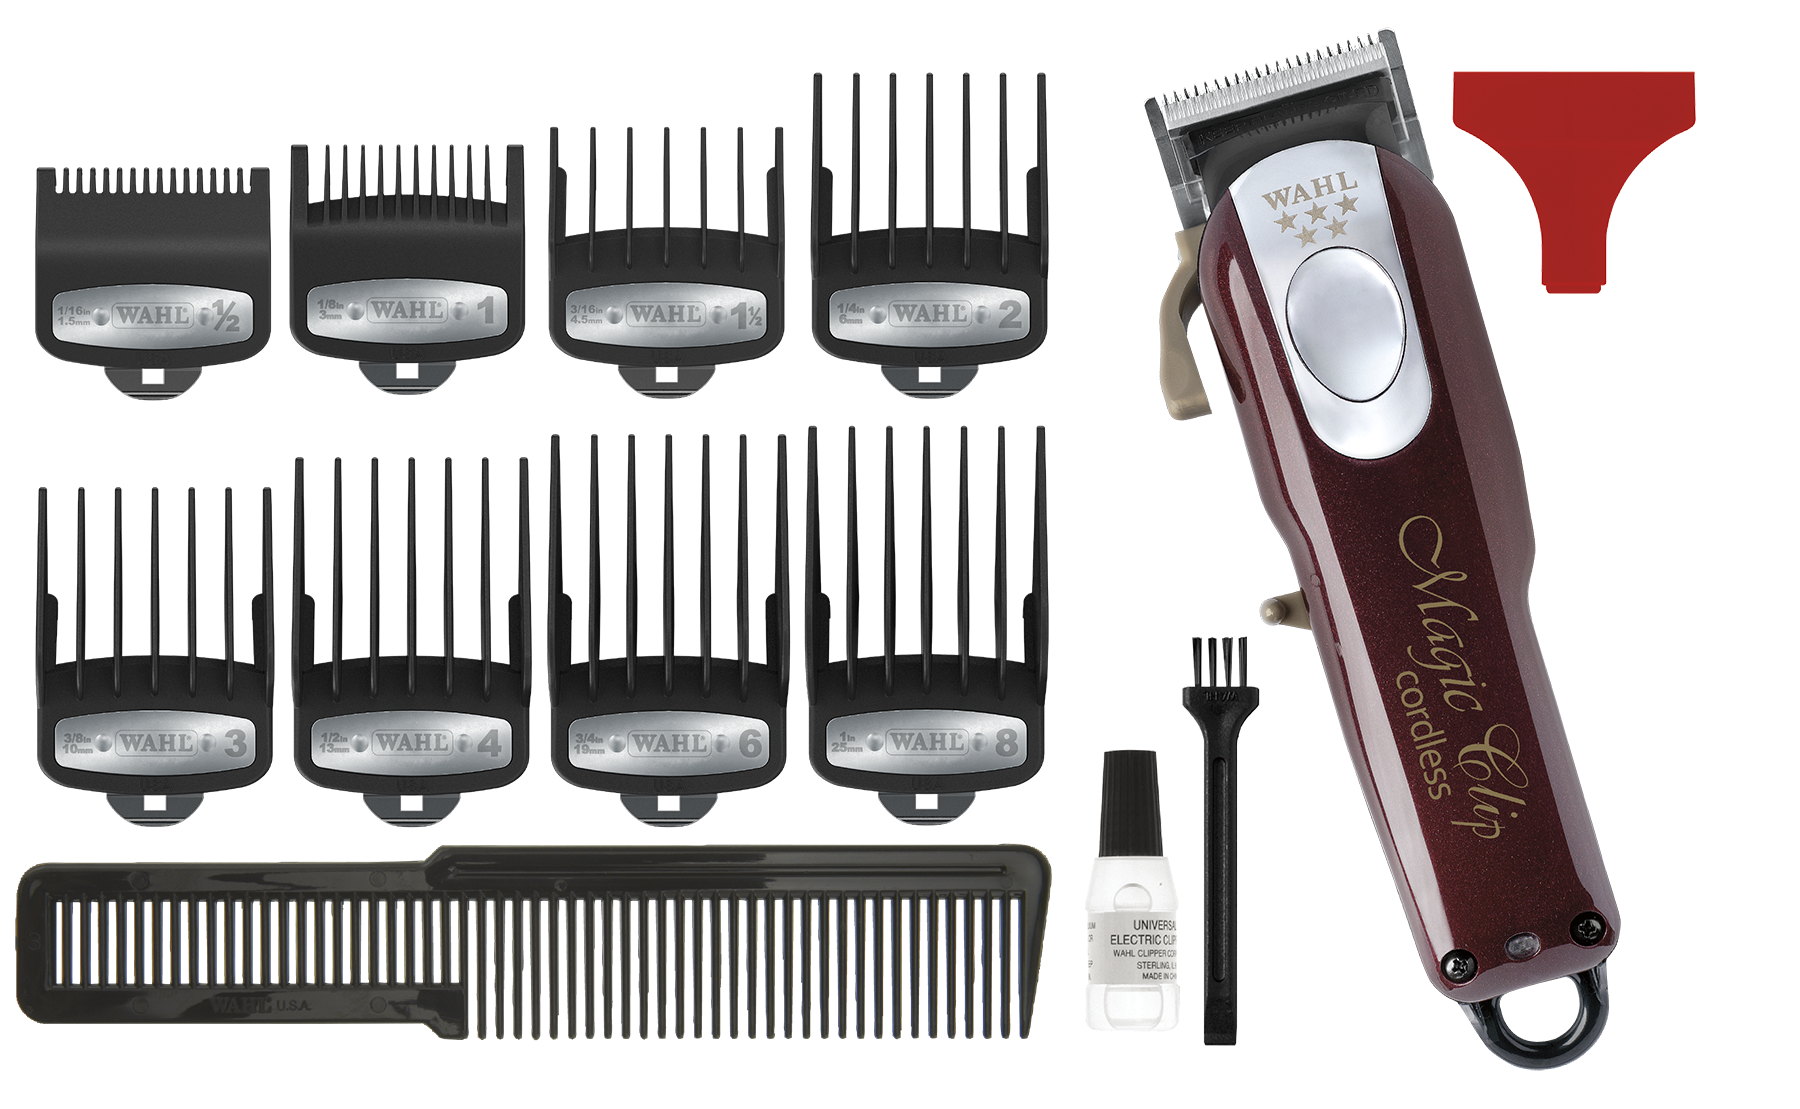 WAHL Magic Clip Cordless Clipper   - Tondeuse Shop for  professional WAHL clippers and trimmers